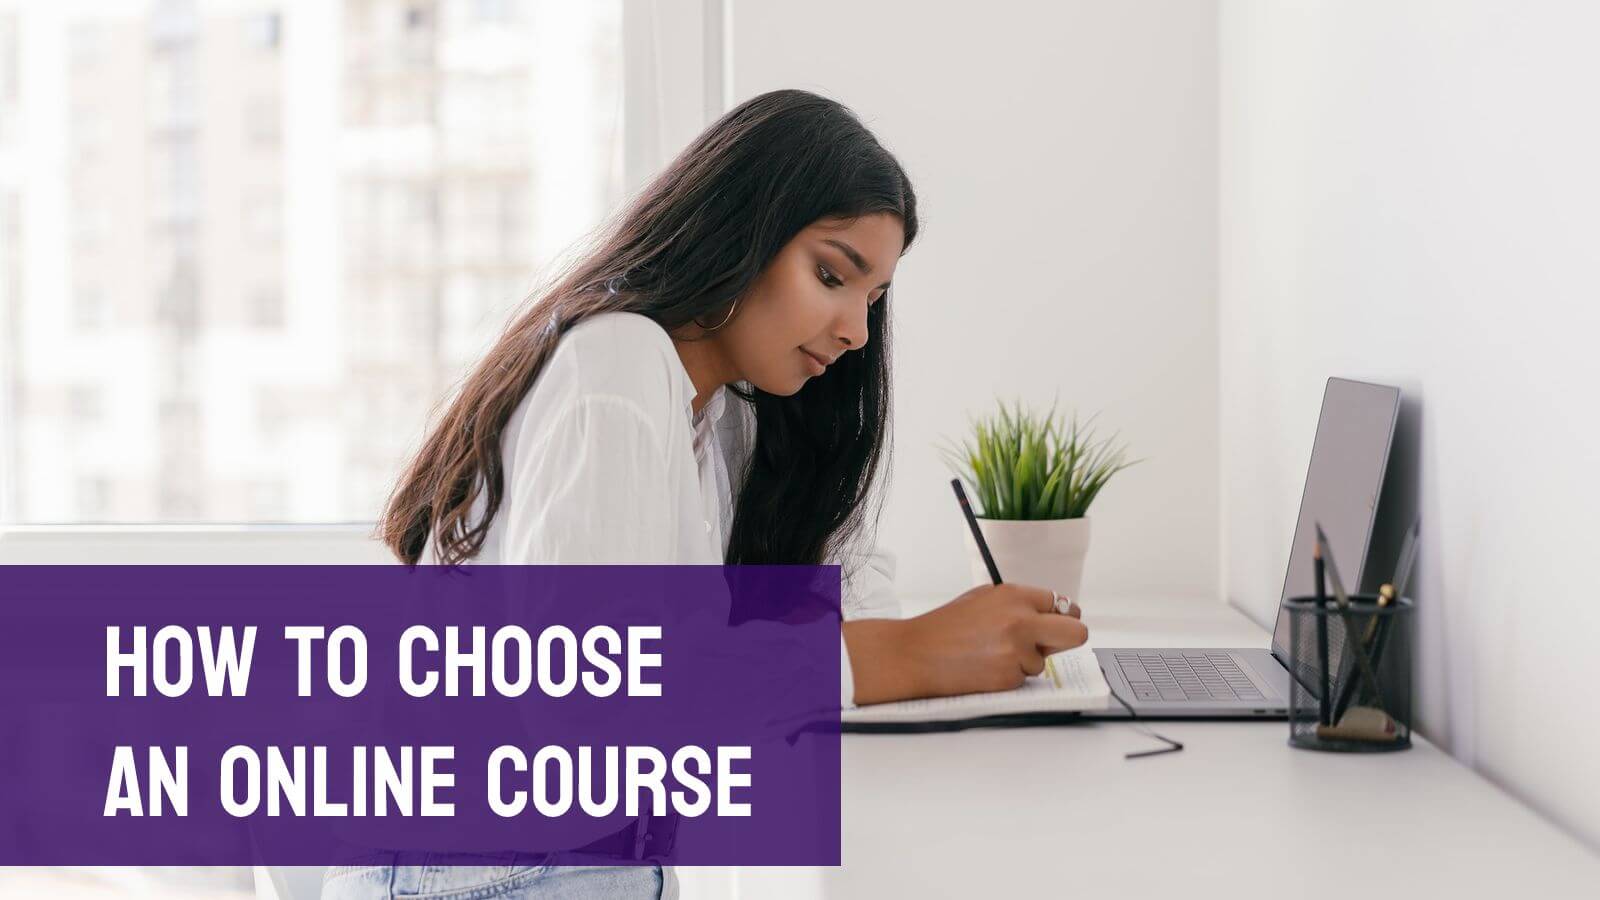 How to choose and online course that would be the most fulfilling?